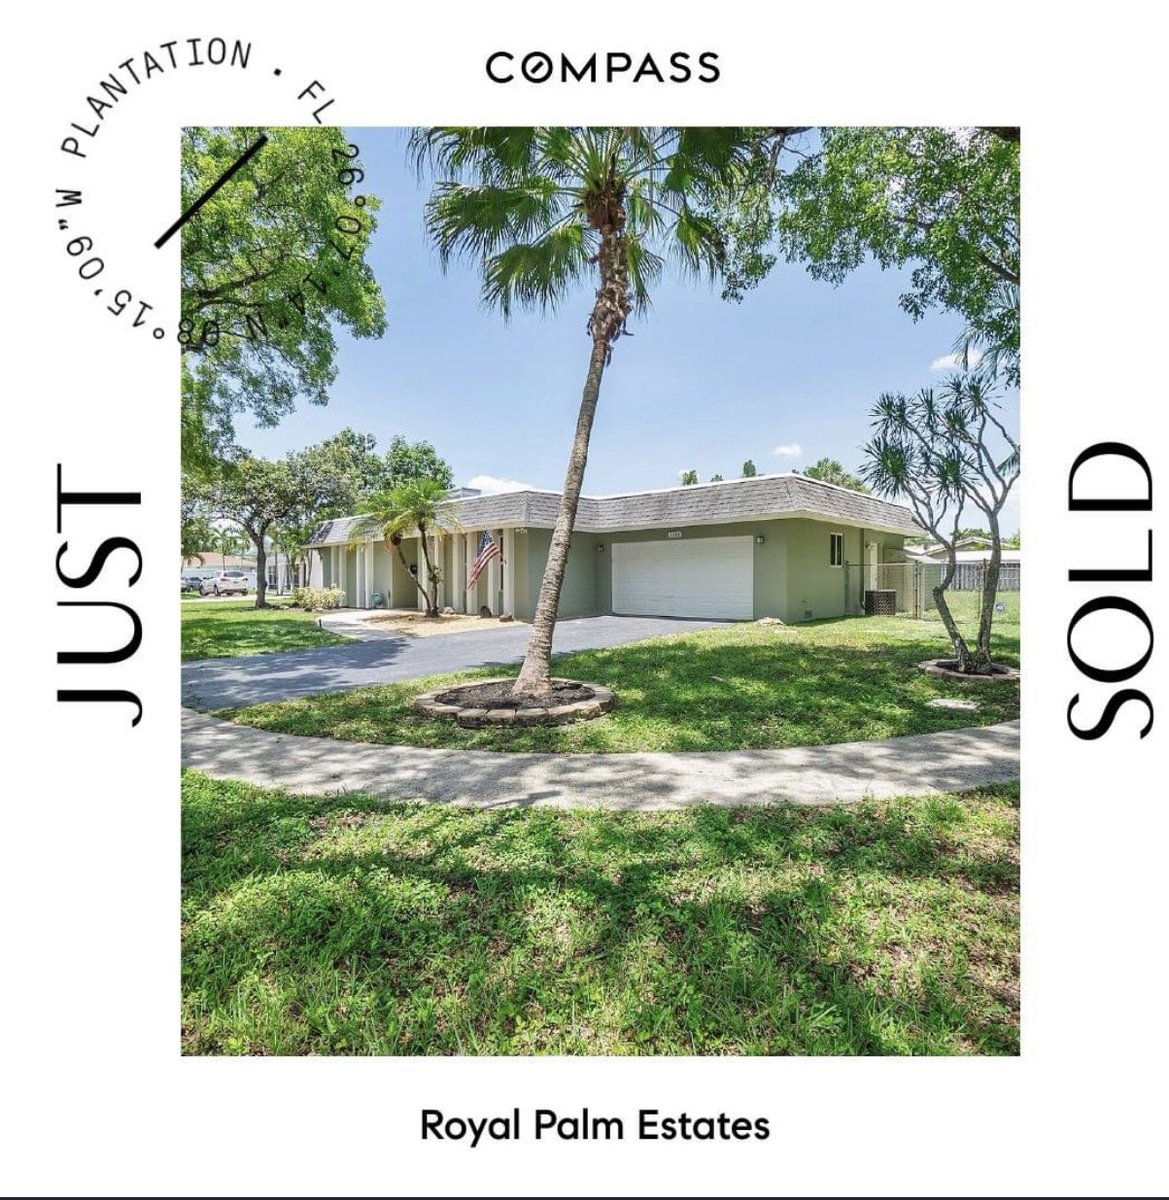 JUST SOLD!  
Congratulations to both the seller and buyers of this beautiful home. Best to Jon and Stephen on their new adventures.  Ashley welcome to your New Home! #plantationrealestate #compassrealestate #lisaechea #echeagroup #SellingPlantation